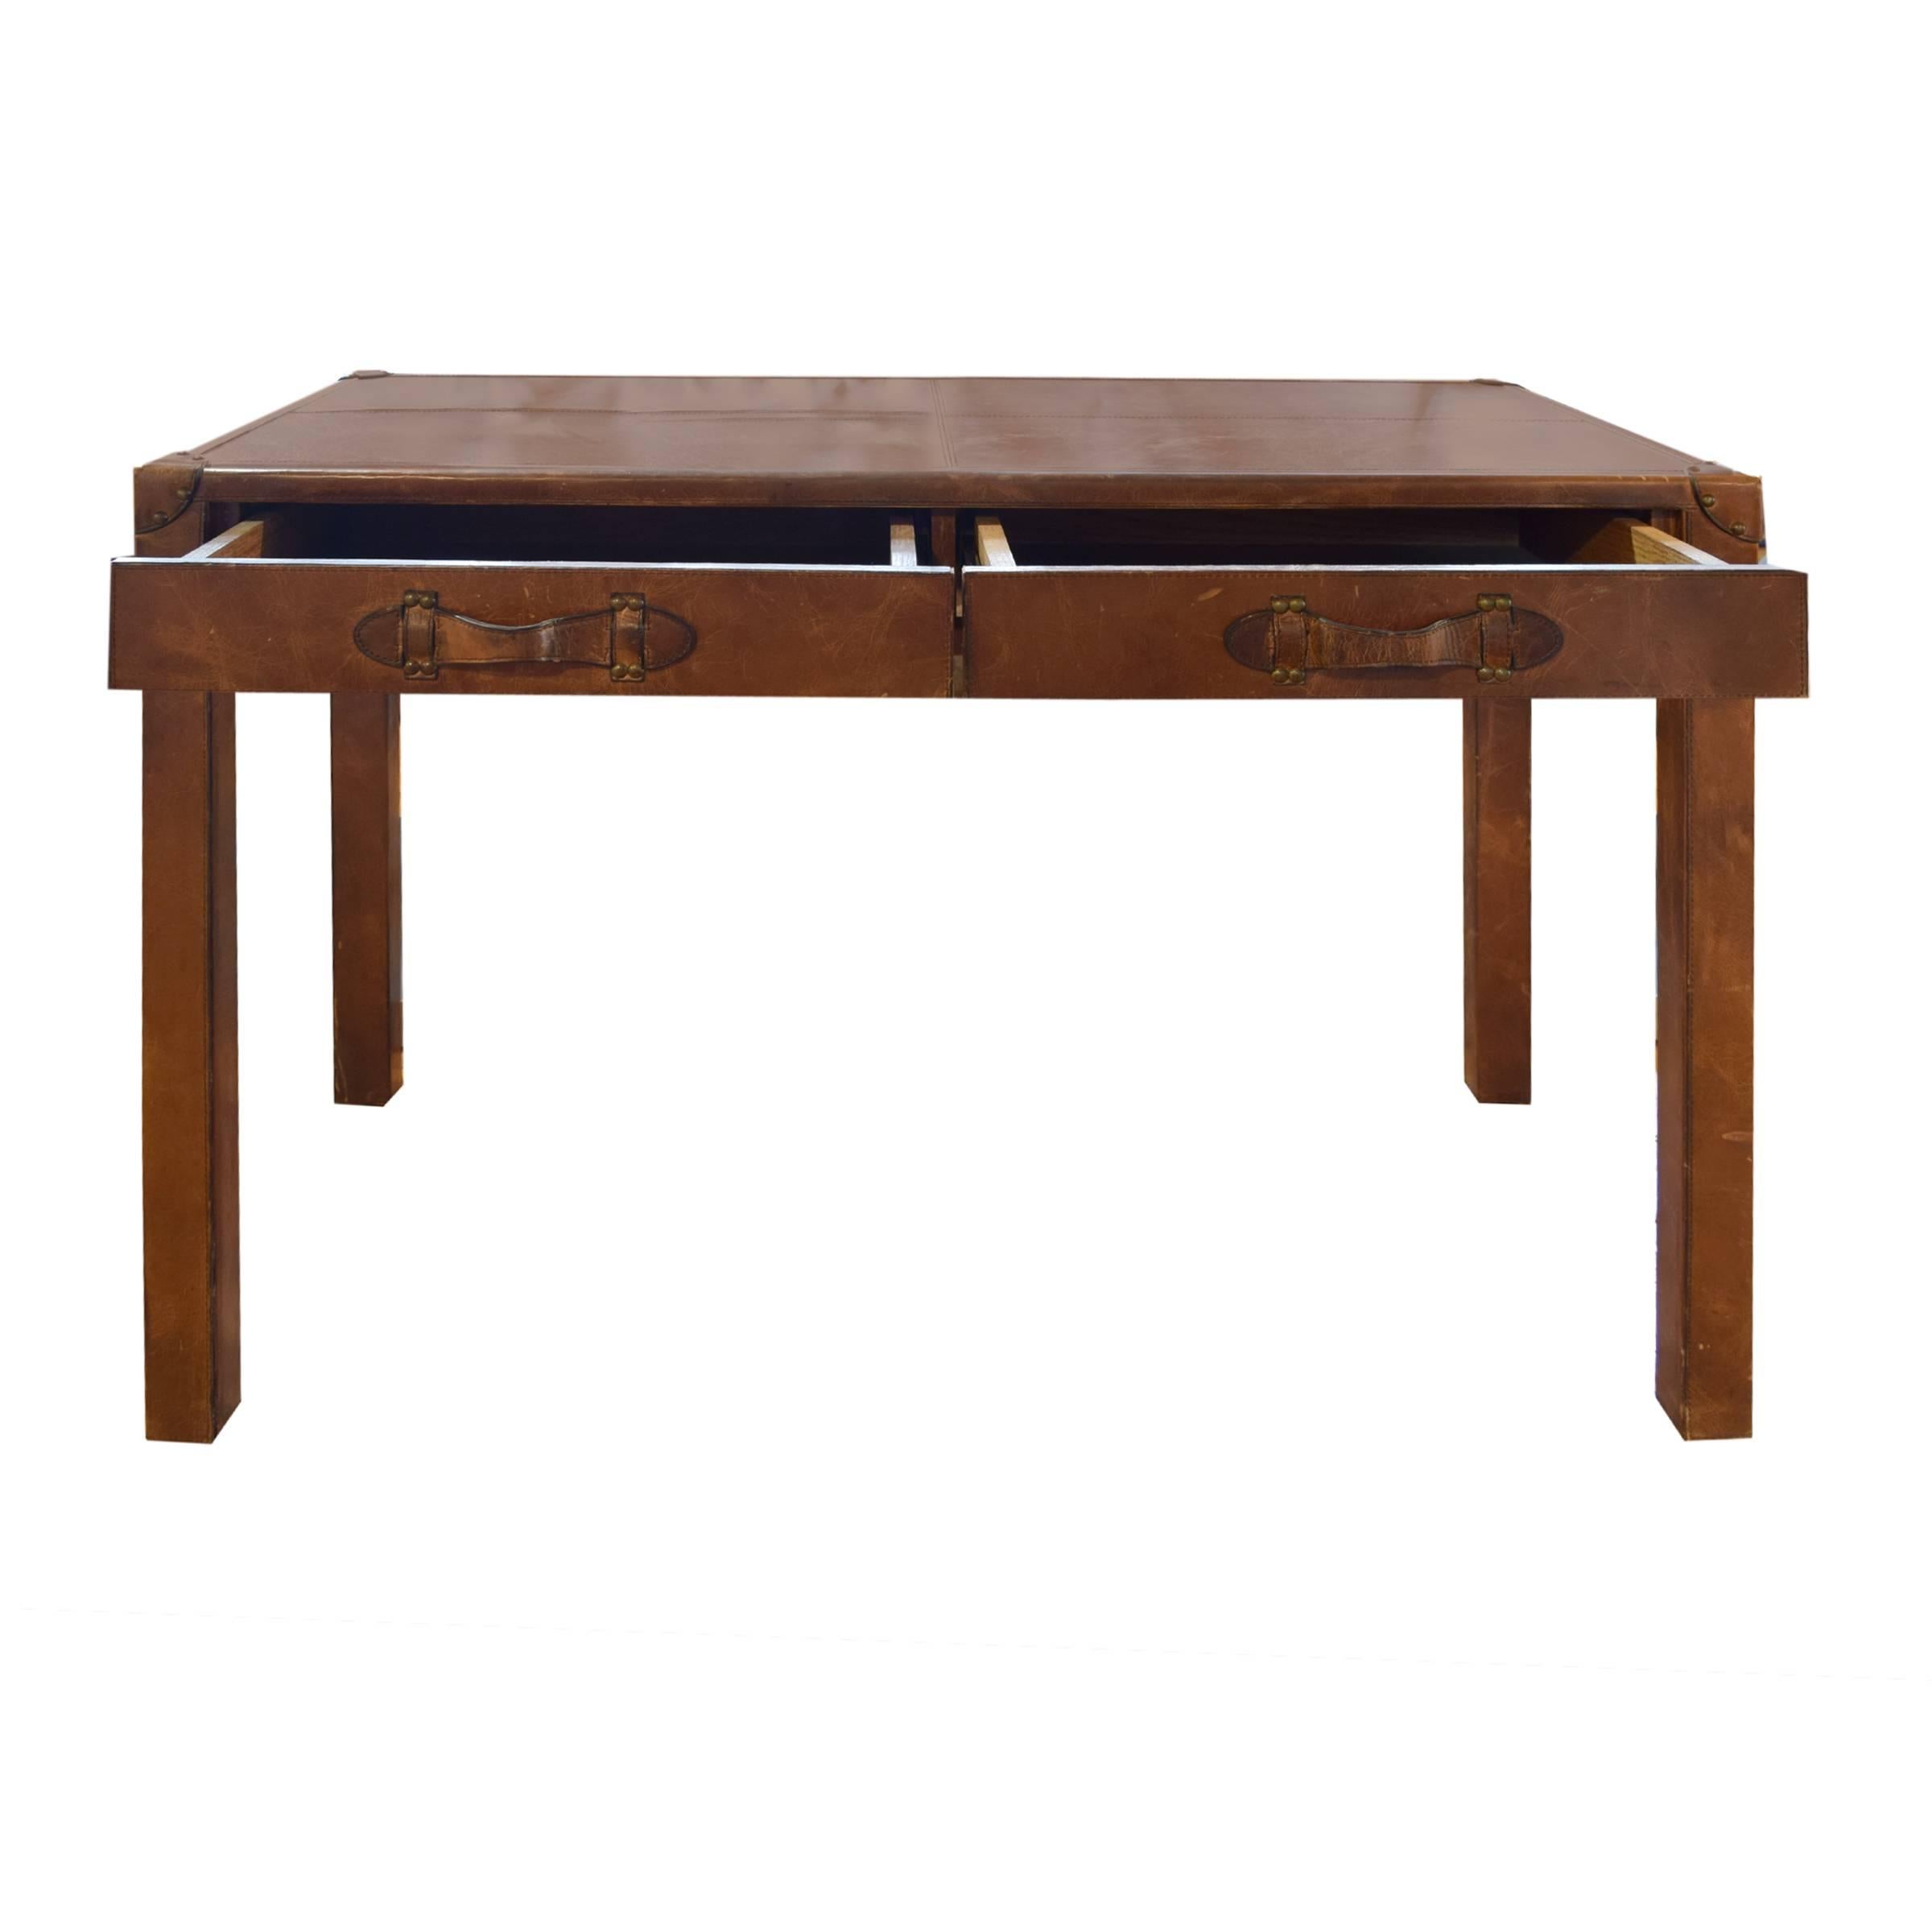 A stylish rectangular Mid-Century leather-clad desk having two large central drawers, raised on four rectangular legs.